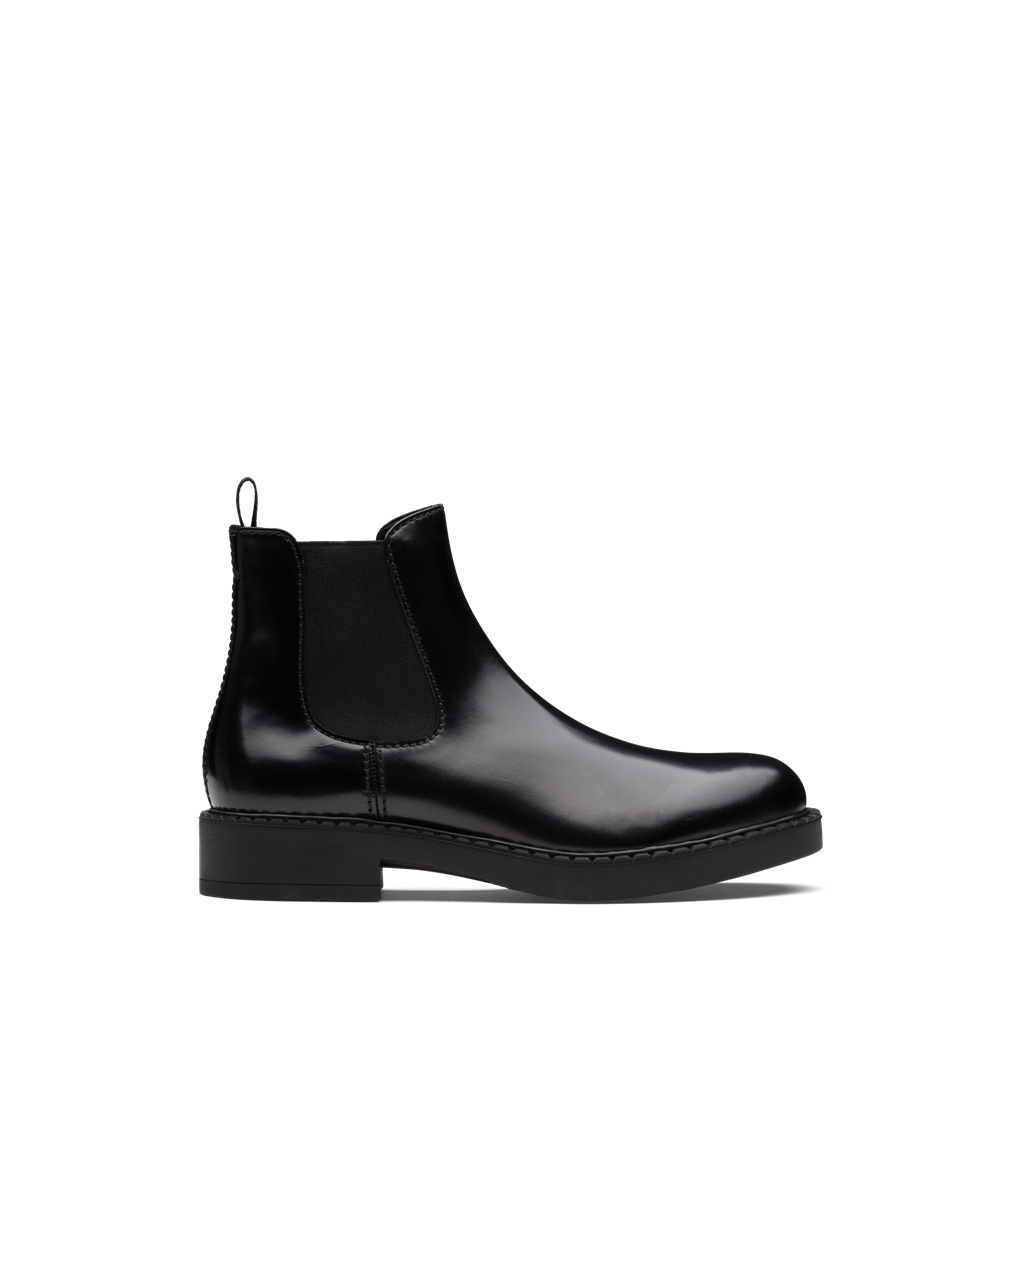 Prada Mens Boots Outlet Store - Brushed Calf Leather Chelsea Boots Black